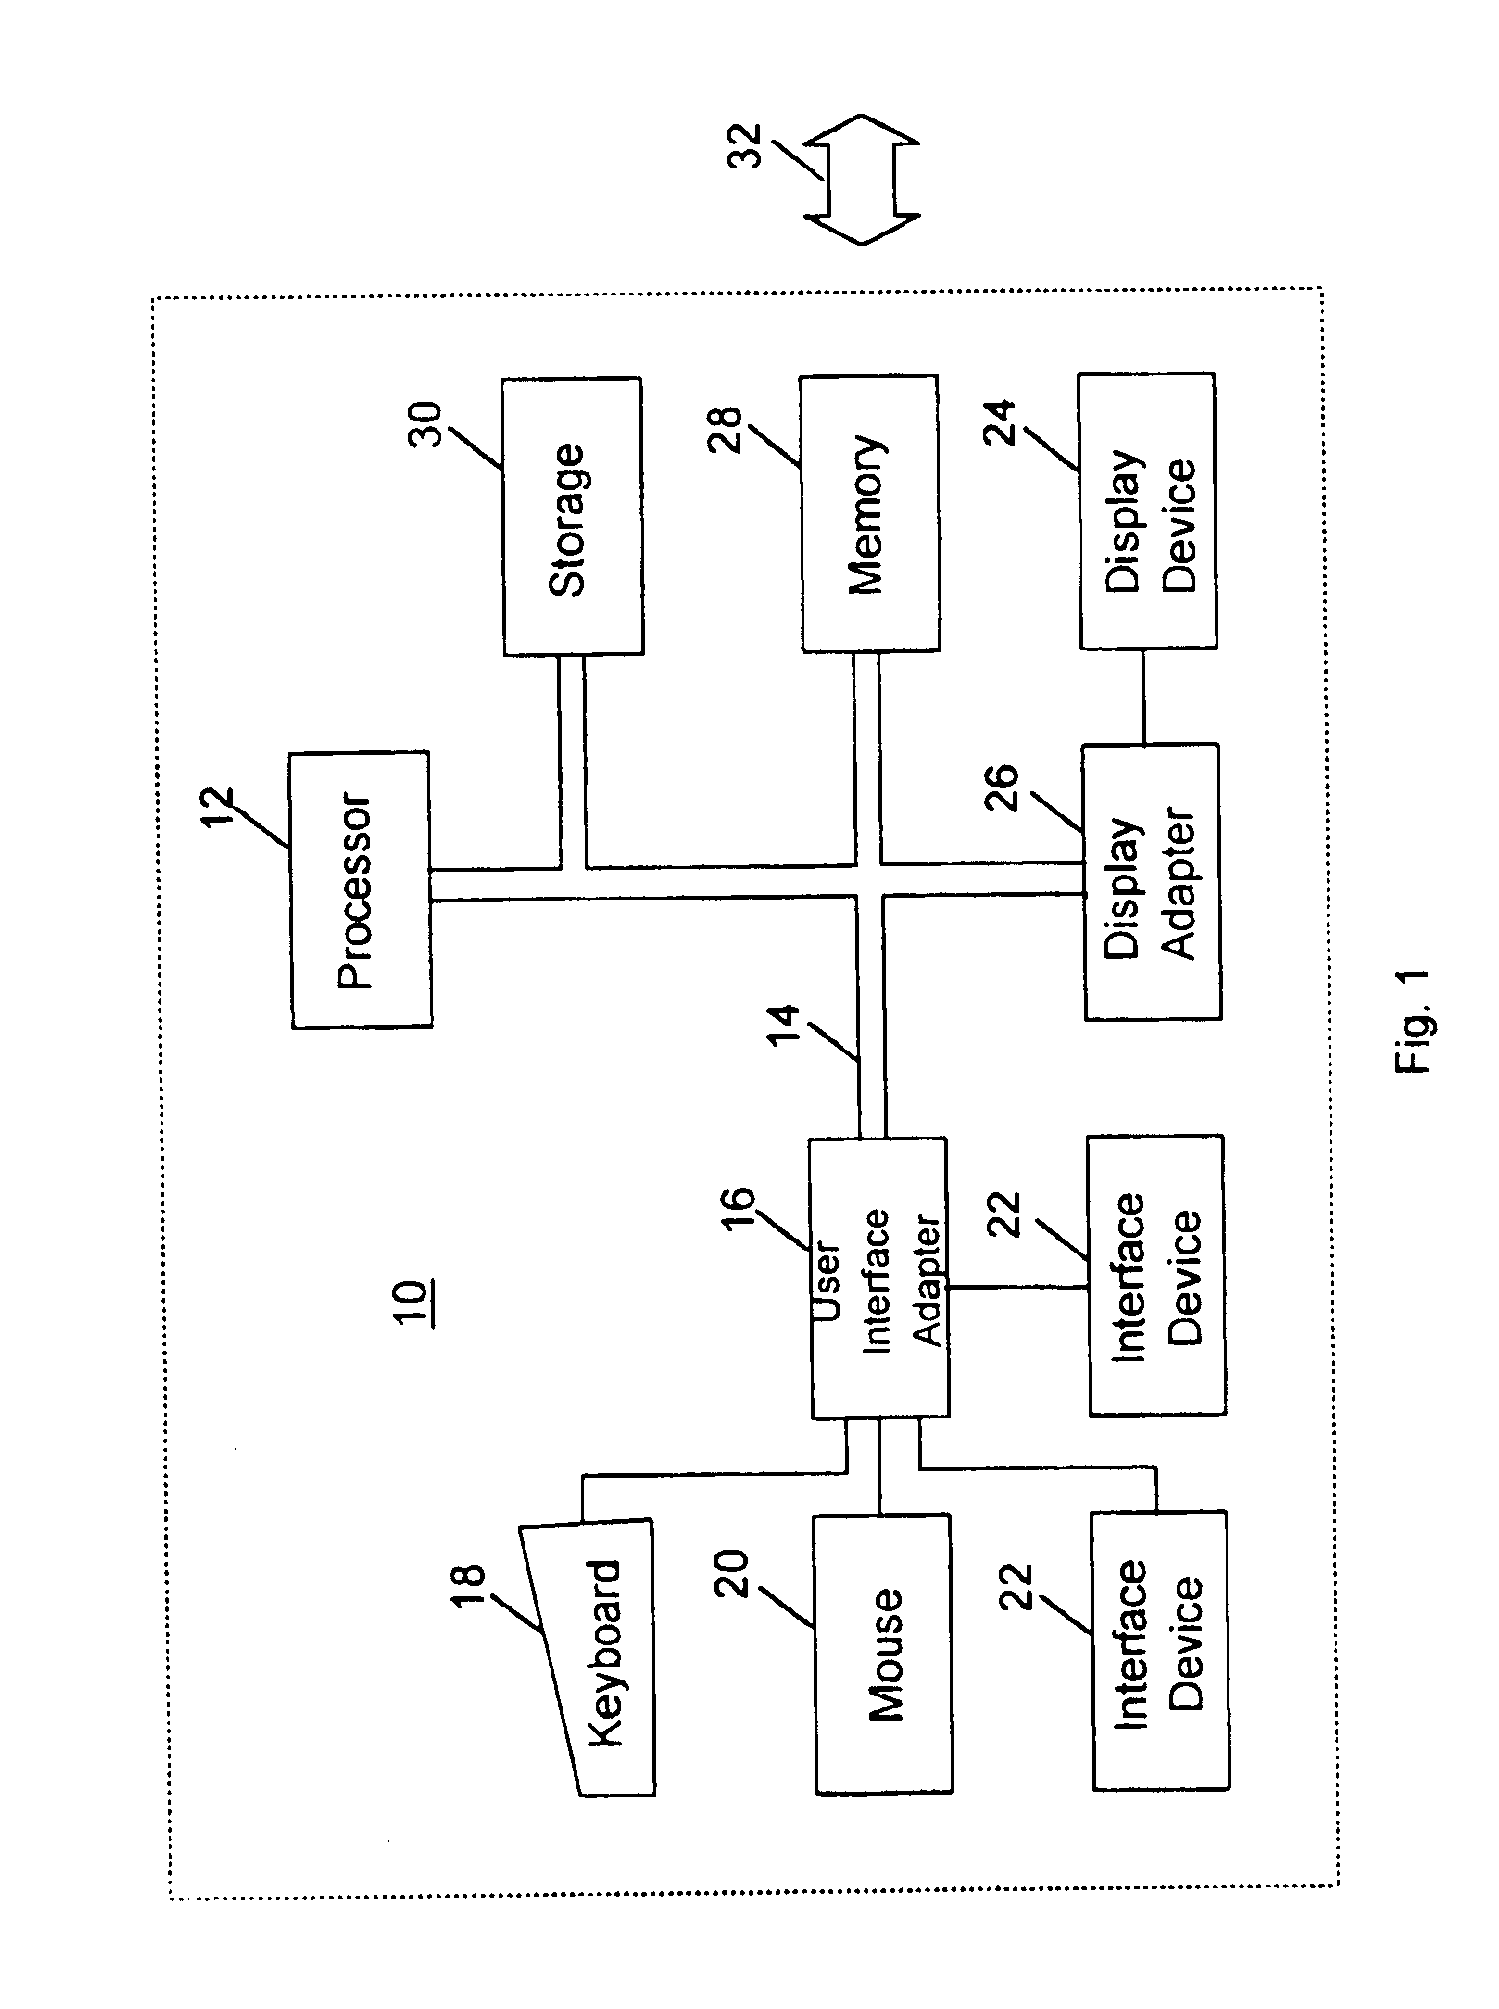 Selective data encryption using style sheet processing for decryption by a key recovery agent